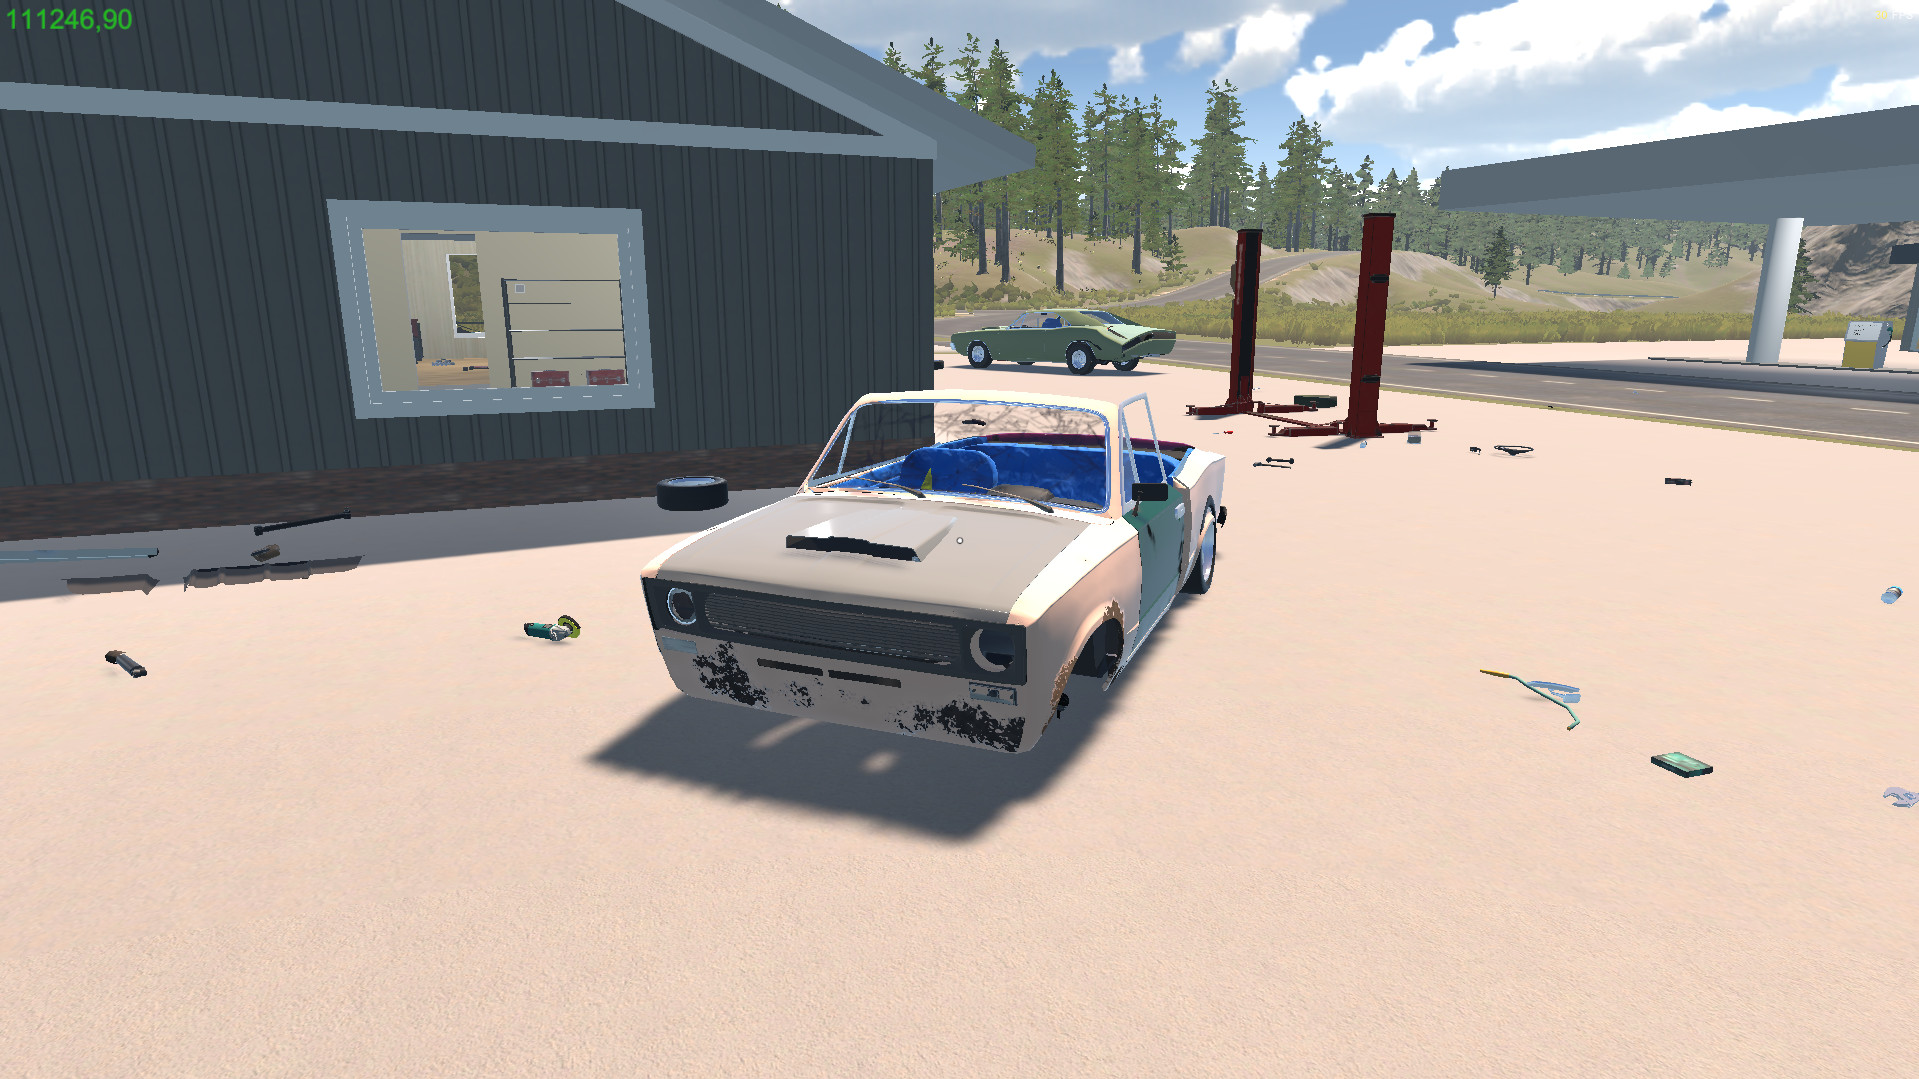 Guys, I think I have to say I'm addicted to this game : r/MySummerCar